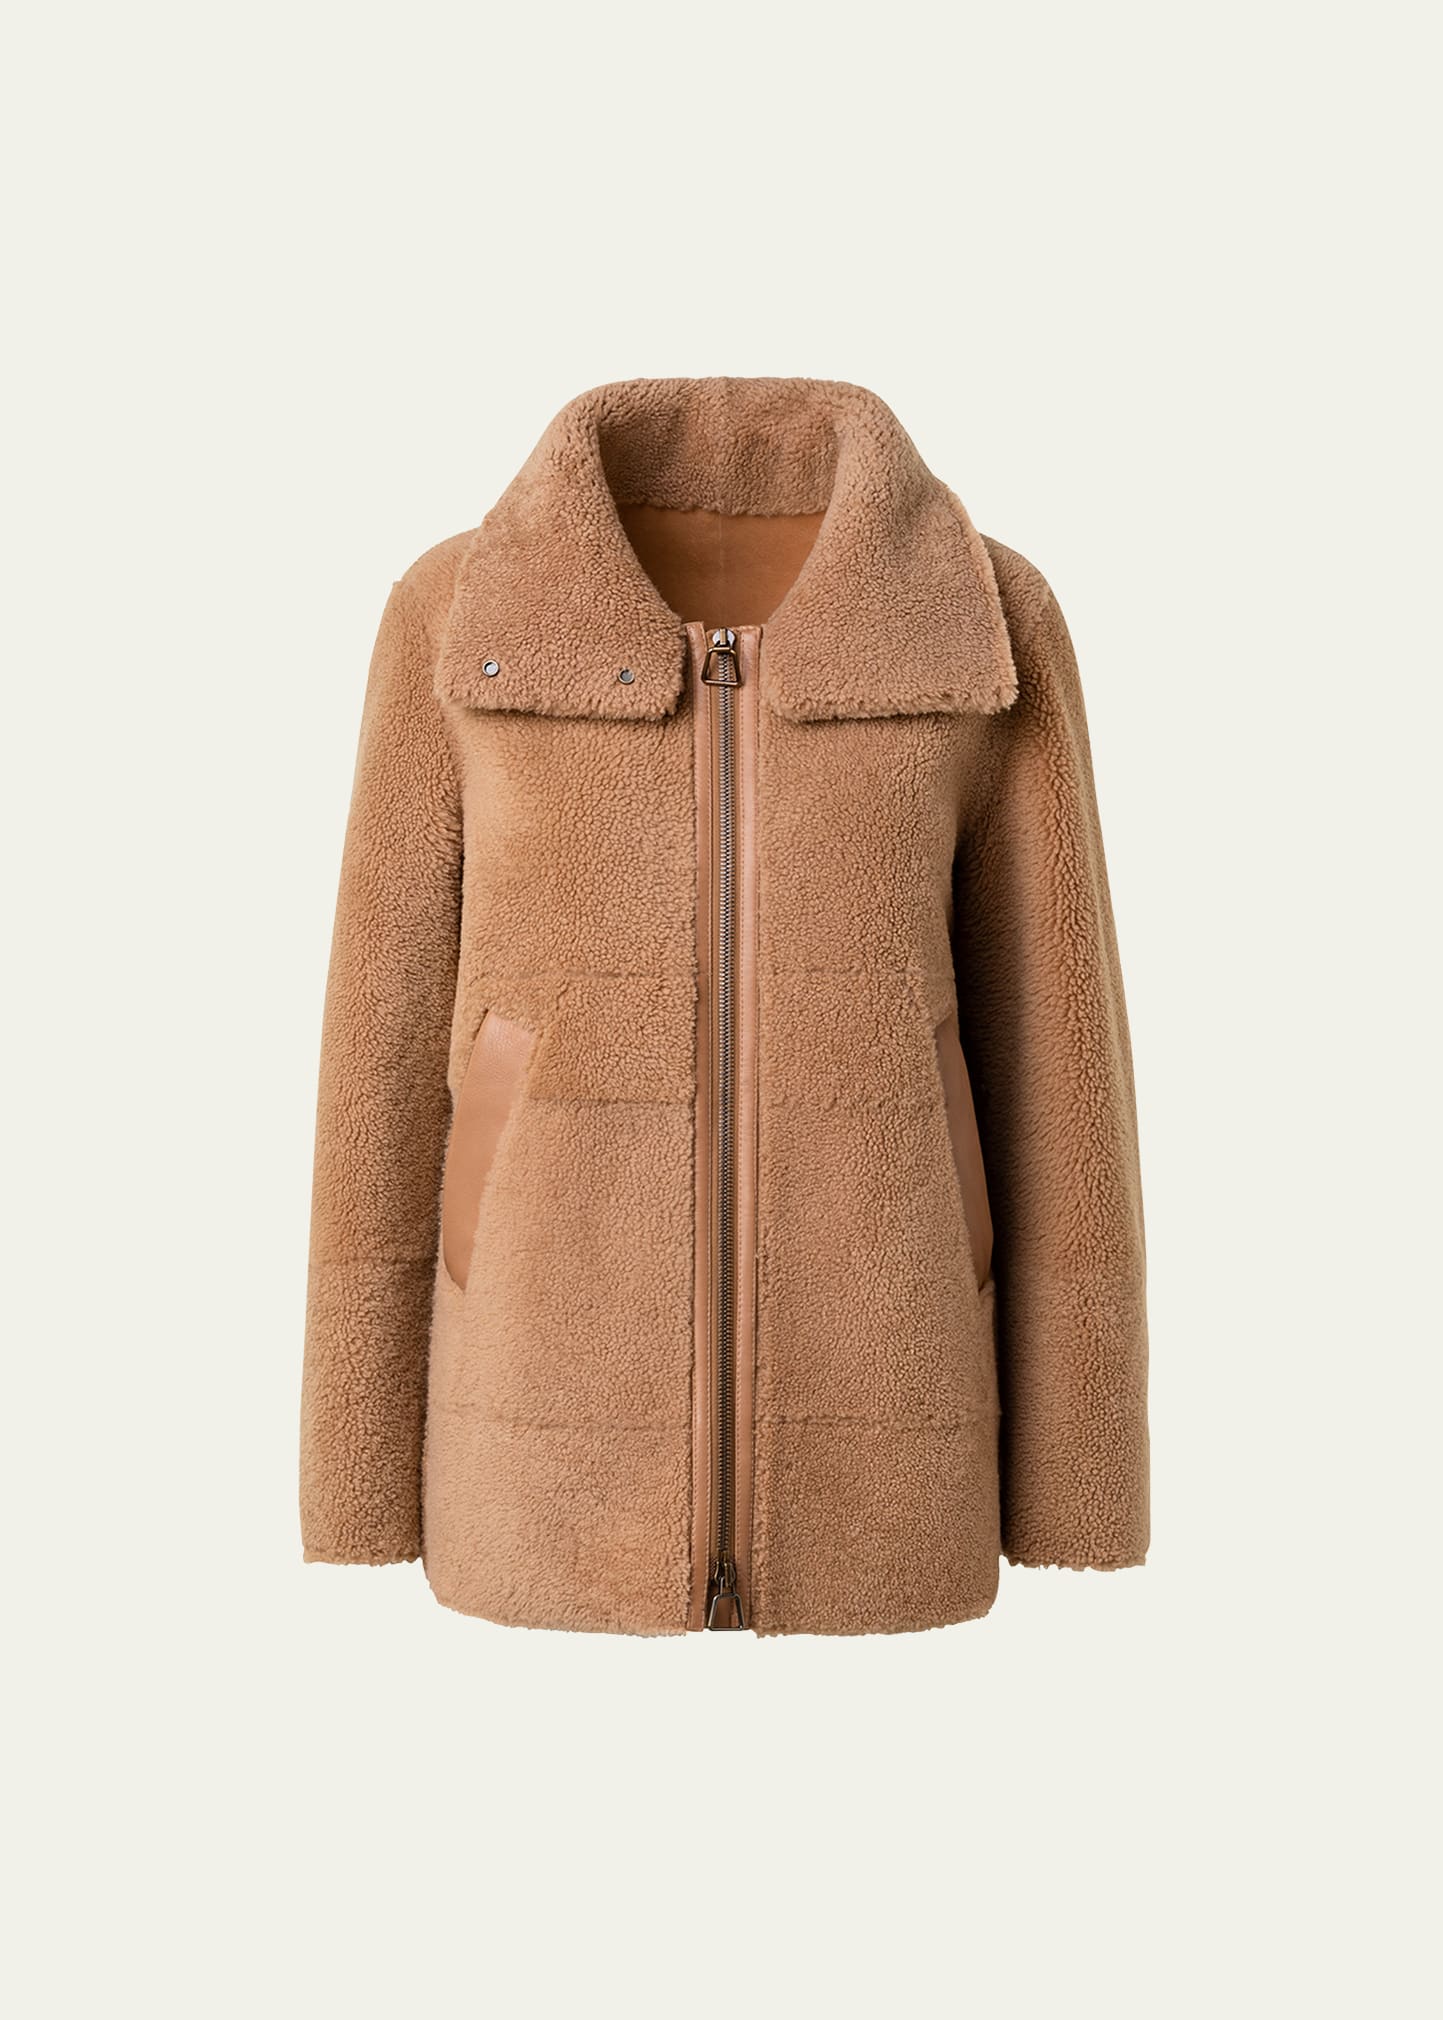 Shearling Leather-Trim Jacket